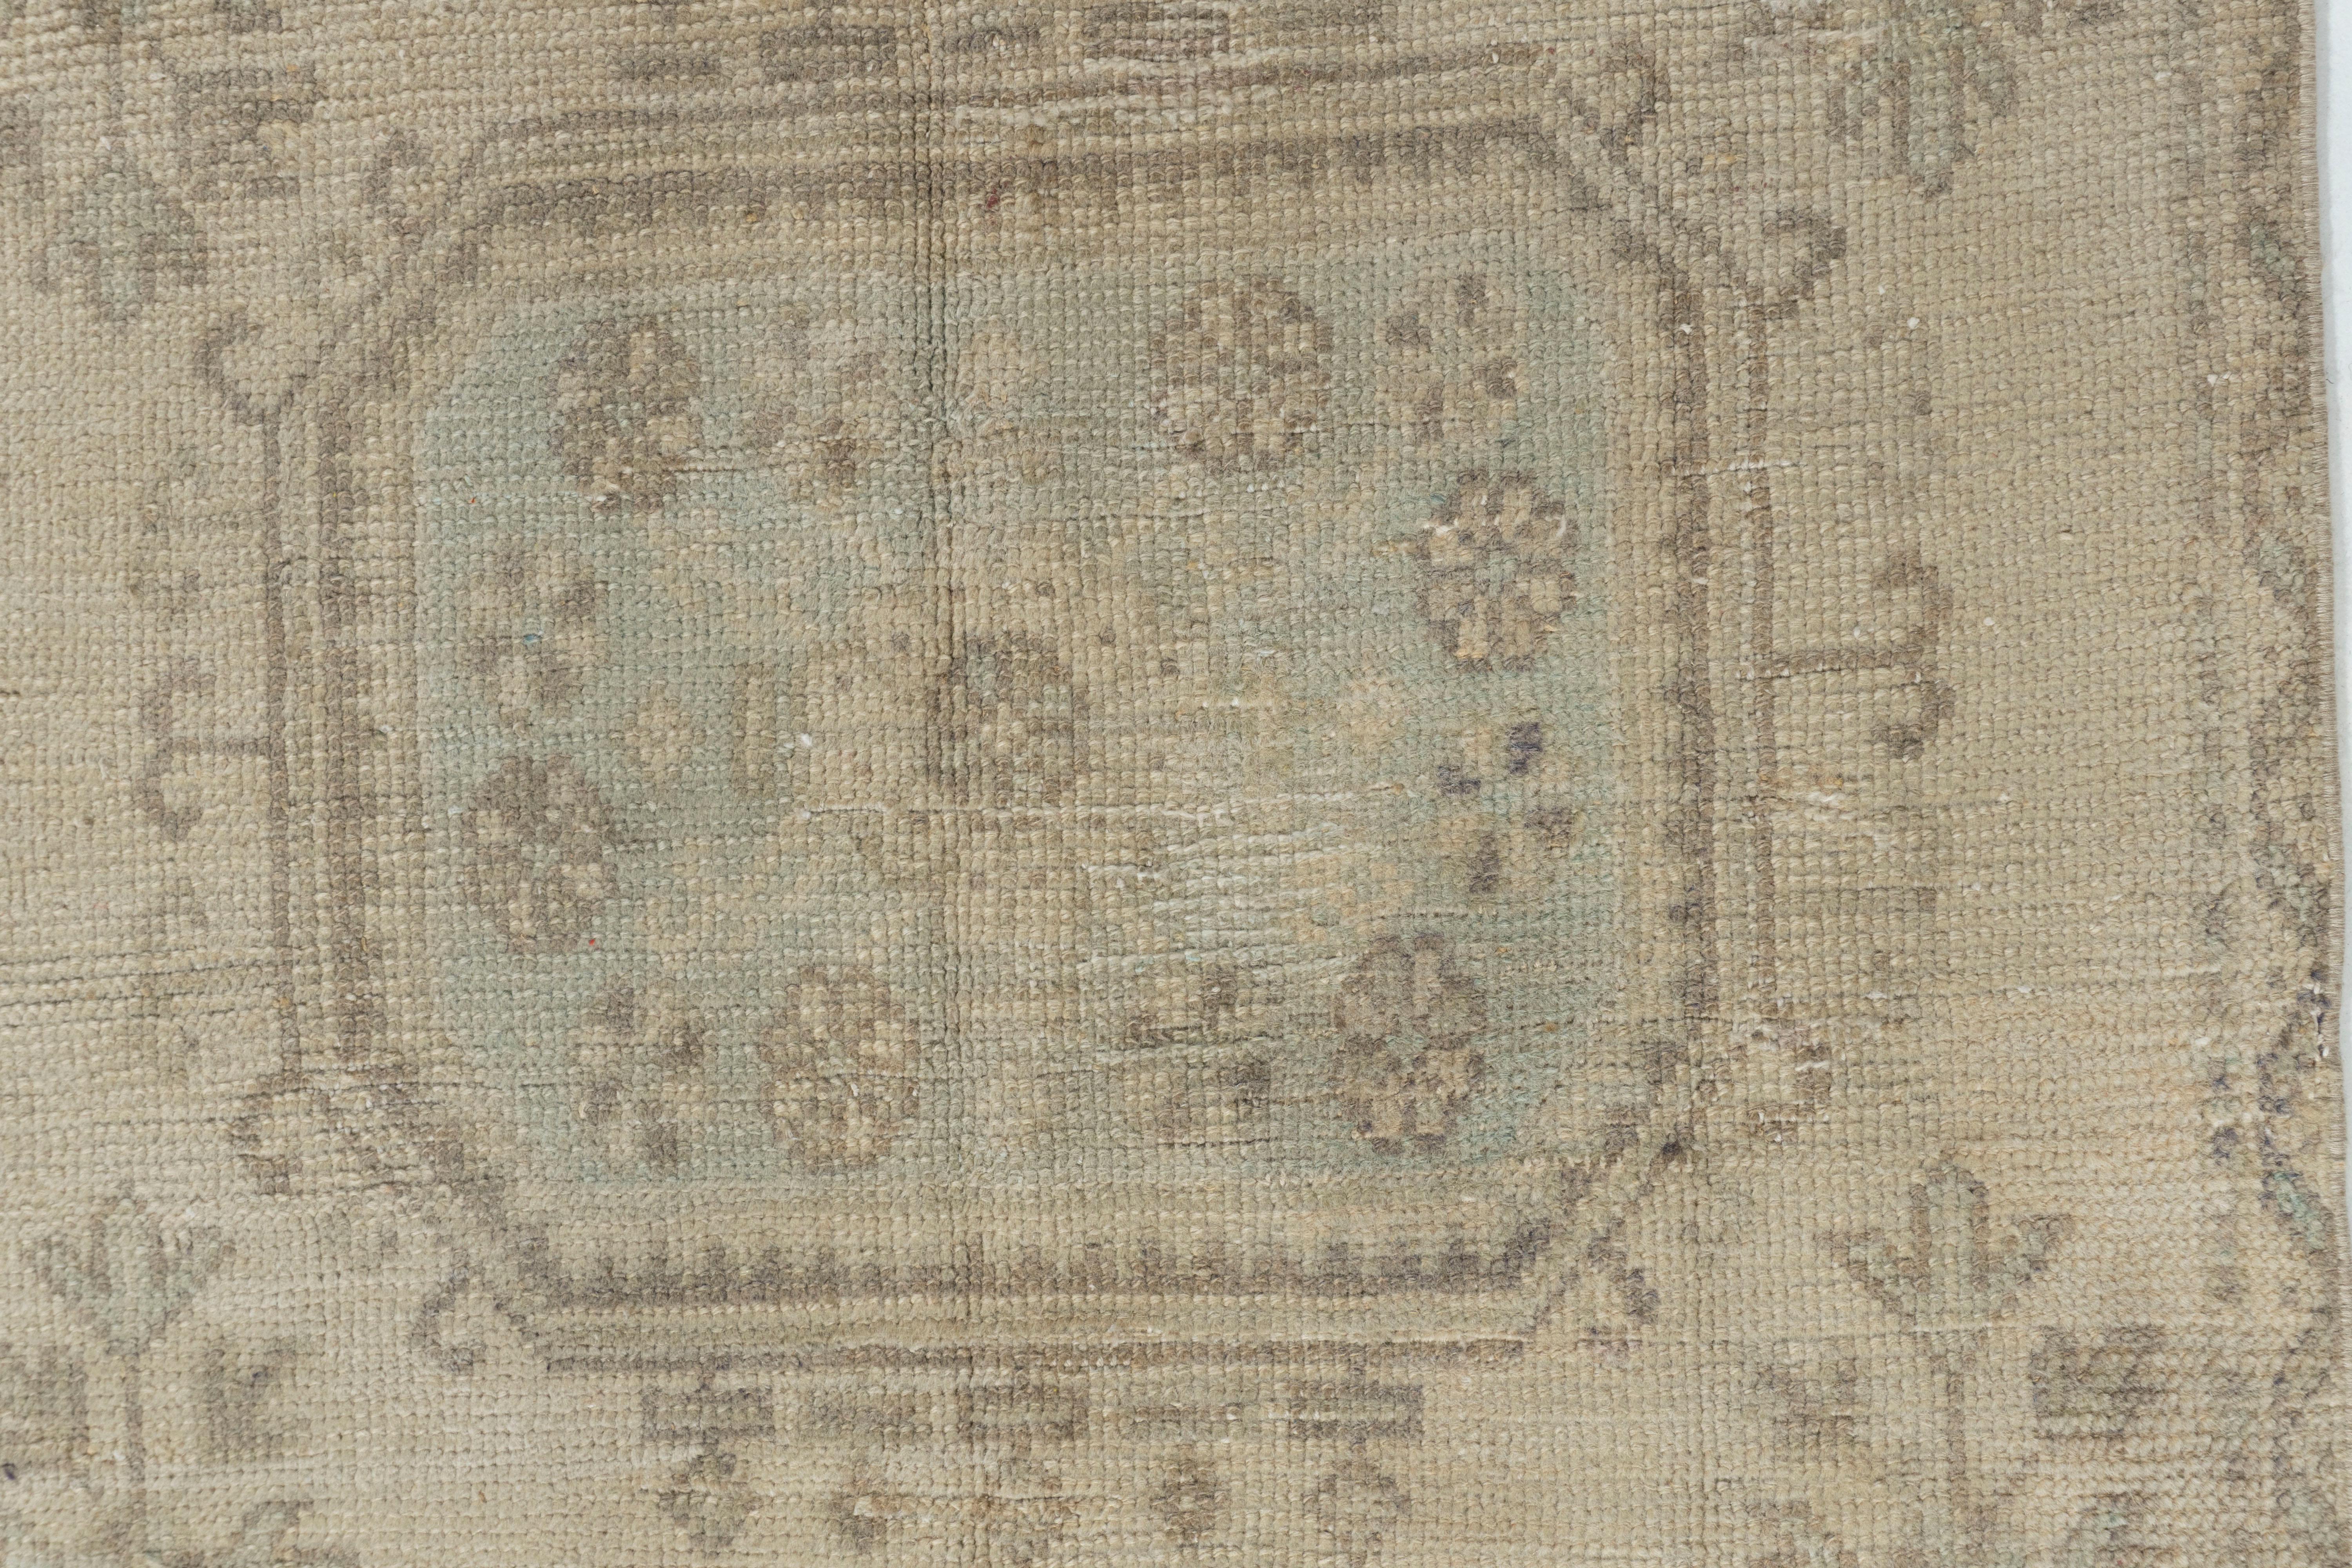 Vintage Turkish Oushak Runner 2'11 X 11'. Even today, Oushak rugs are still the first choice of professional interior designers. Sometimes this is because when grading Oushak carpets, carpet connoisseurs will not only look at the overall quality of